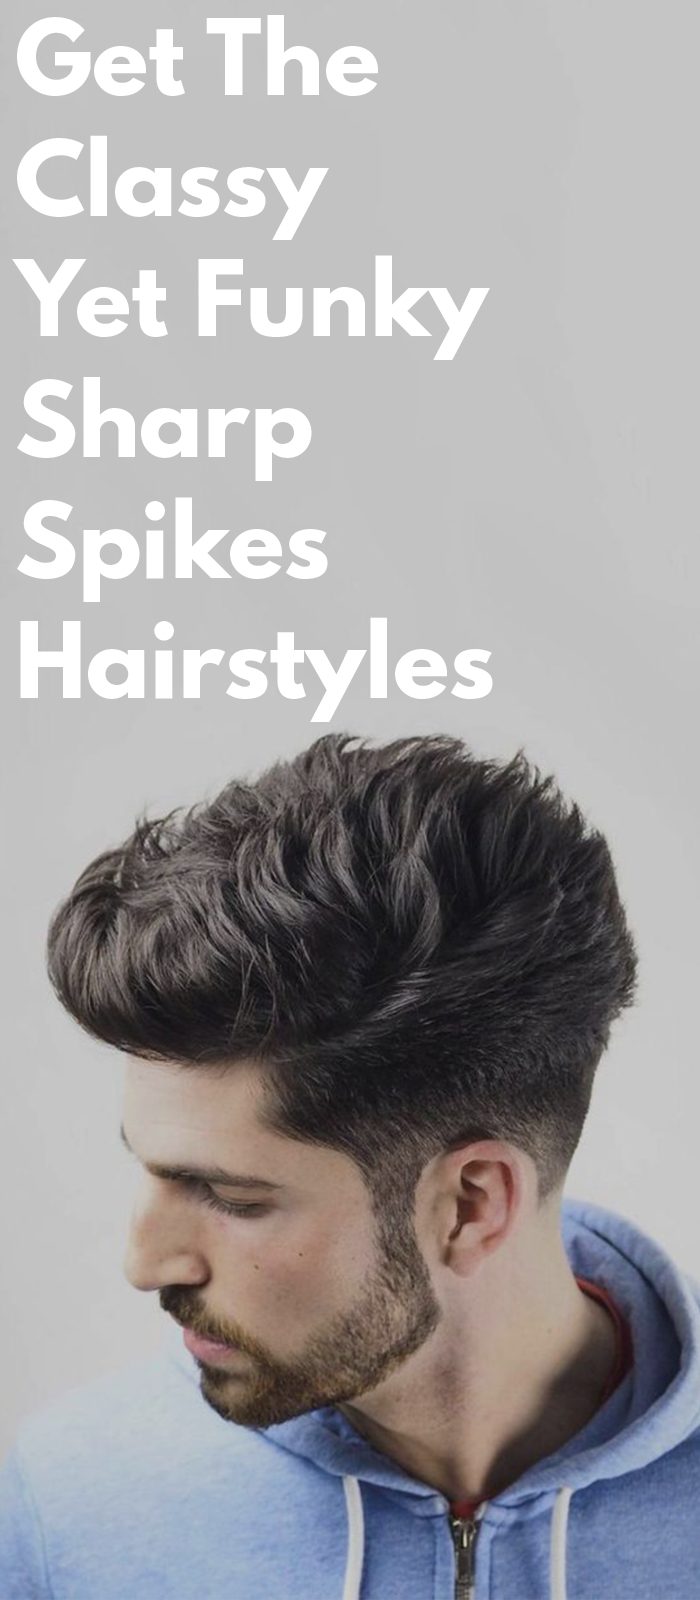 Get The Classy Yet Funky Sharp Spikes Hairstyles! ⋆ Best Fashion Blog For  Men 